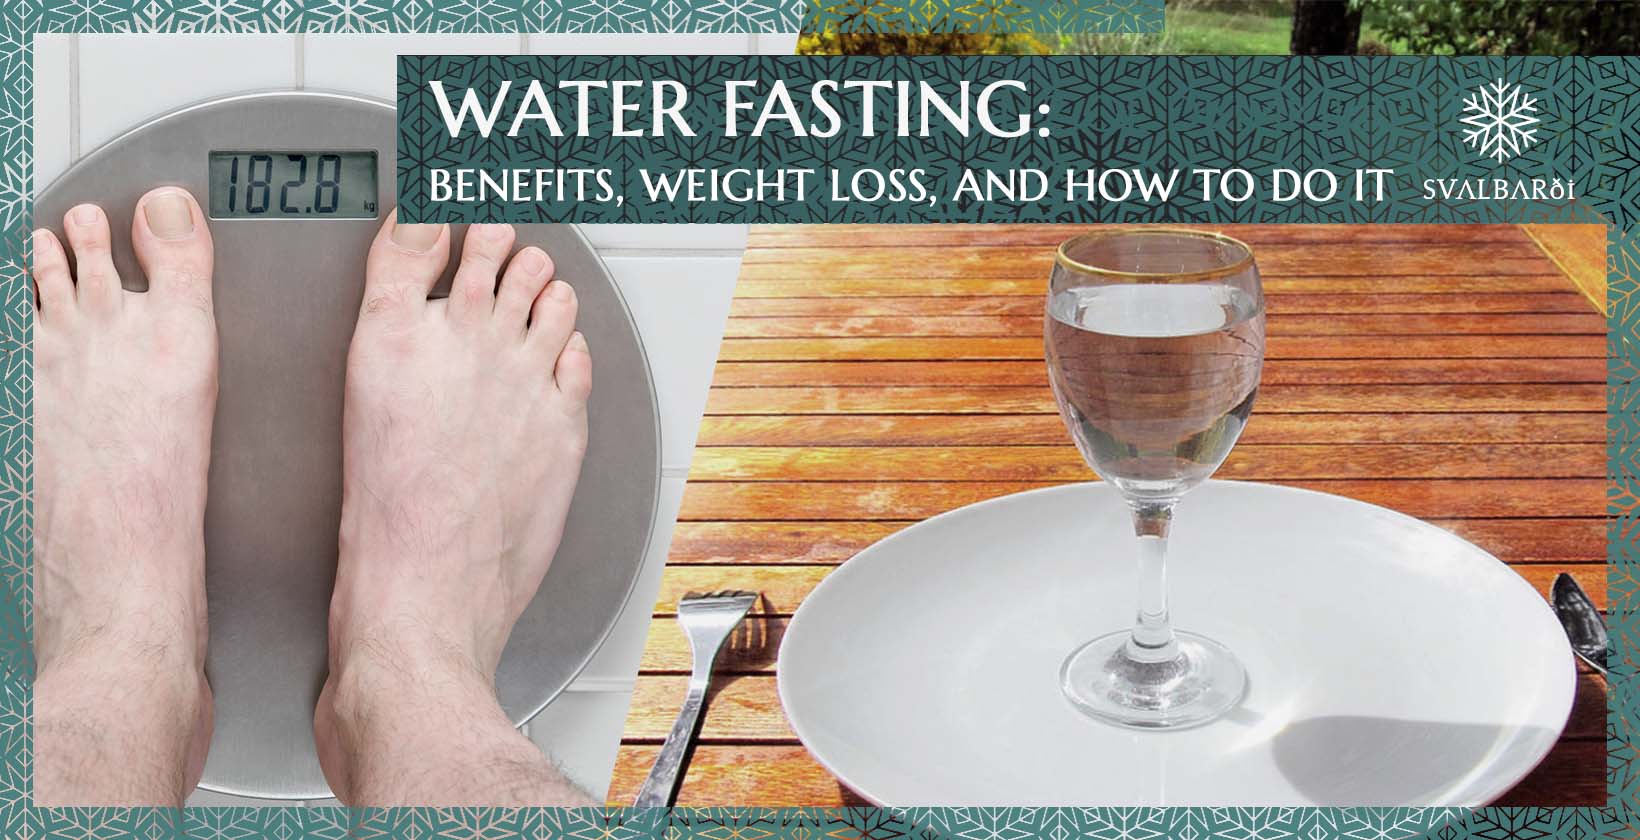 7 days of FASTING just drinking WATER and WITHOUT EATING ANYTHING